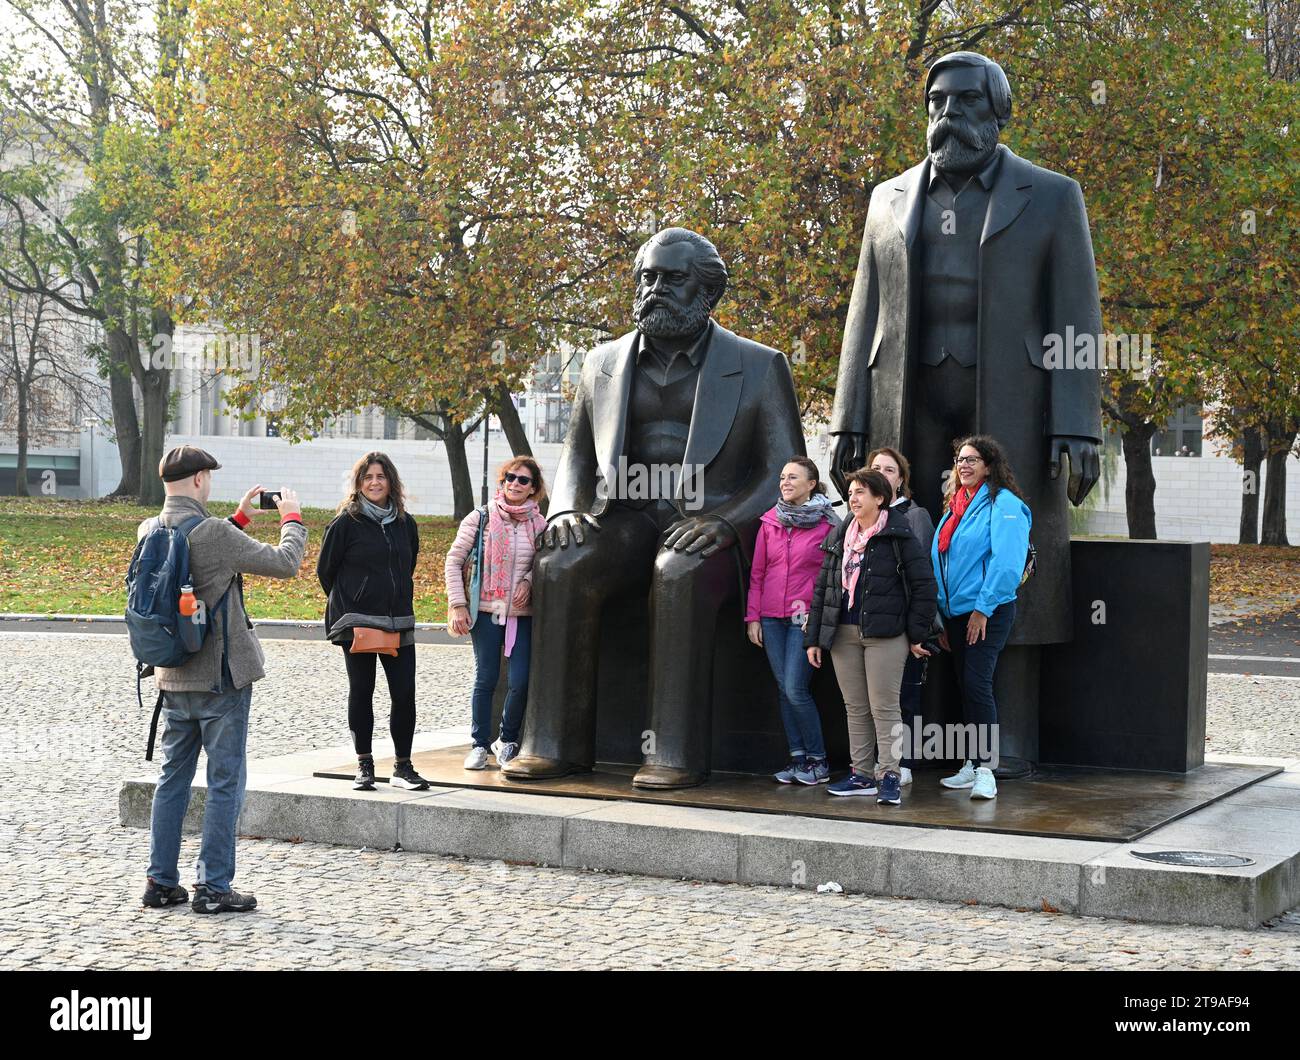 Berlin, Germany - October 31, 2022: People take pictures near the statue of Karl Marx and Friedrich Engels in Berlin. Stock Photo